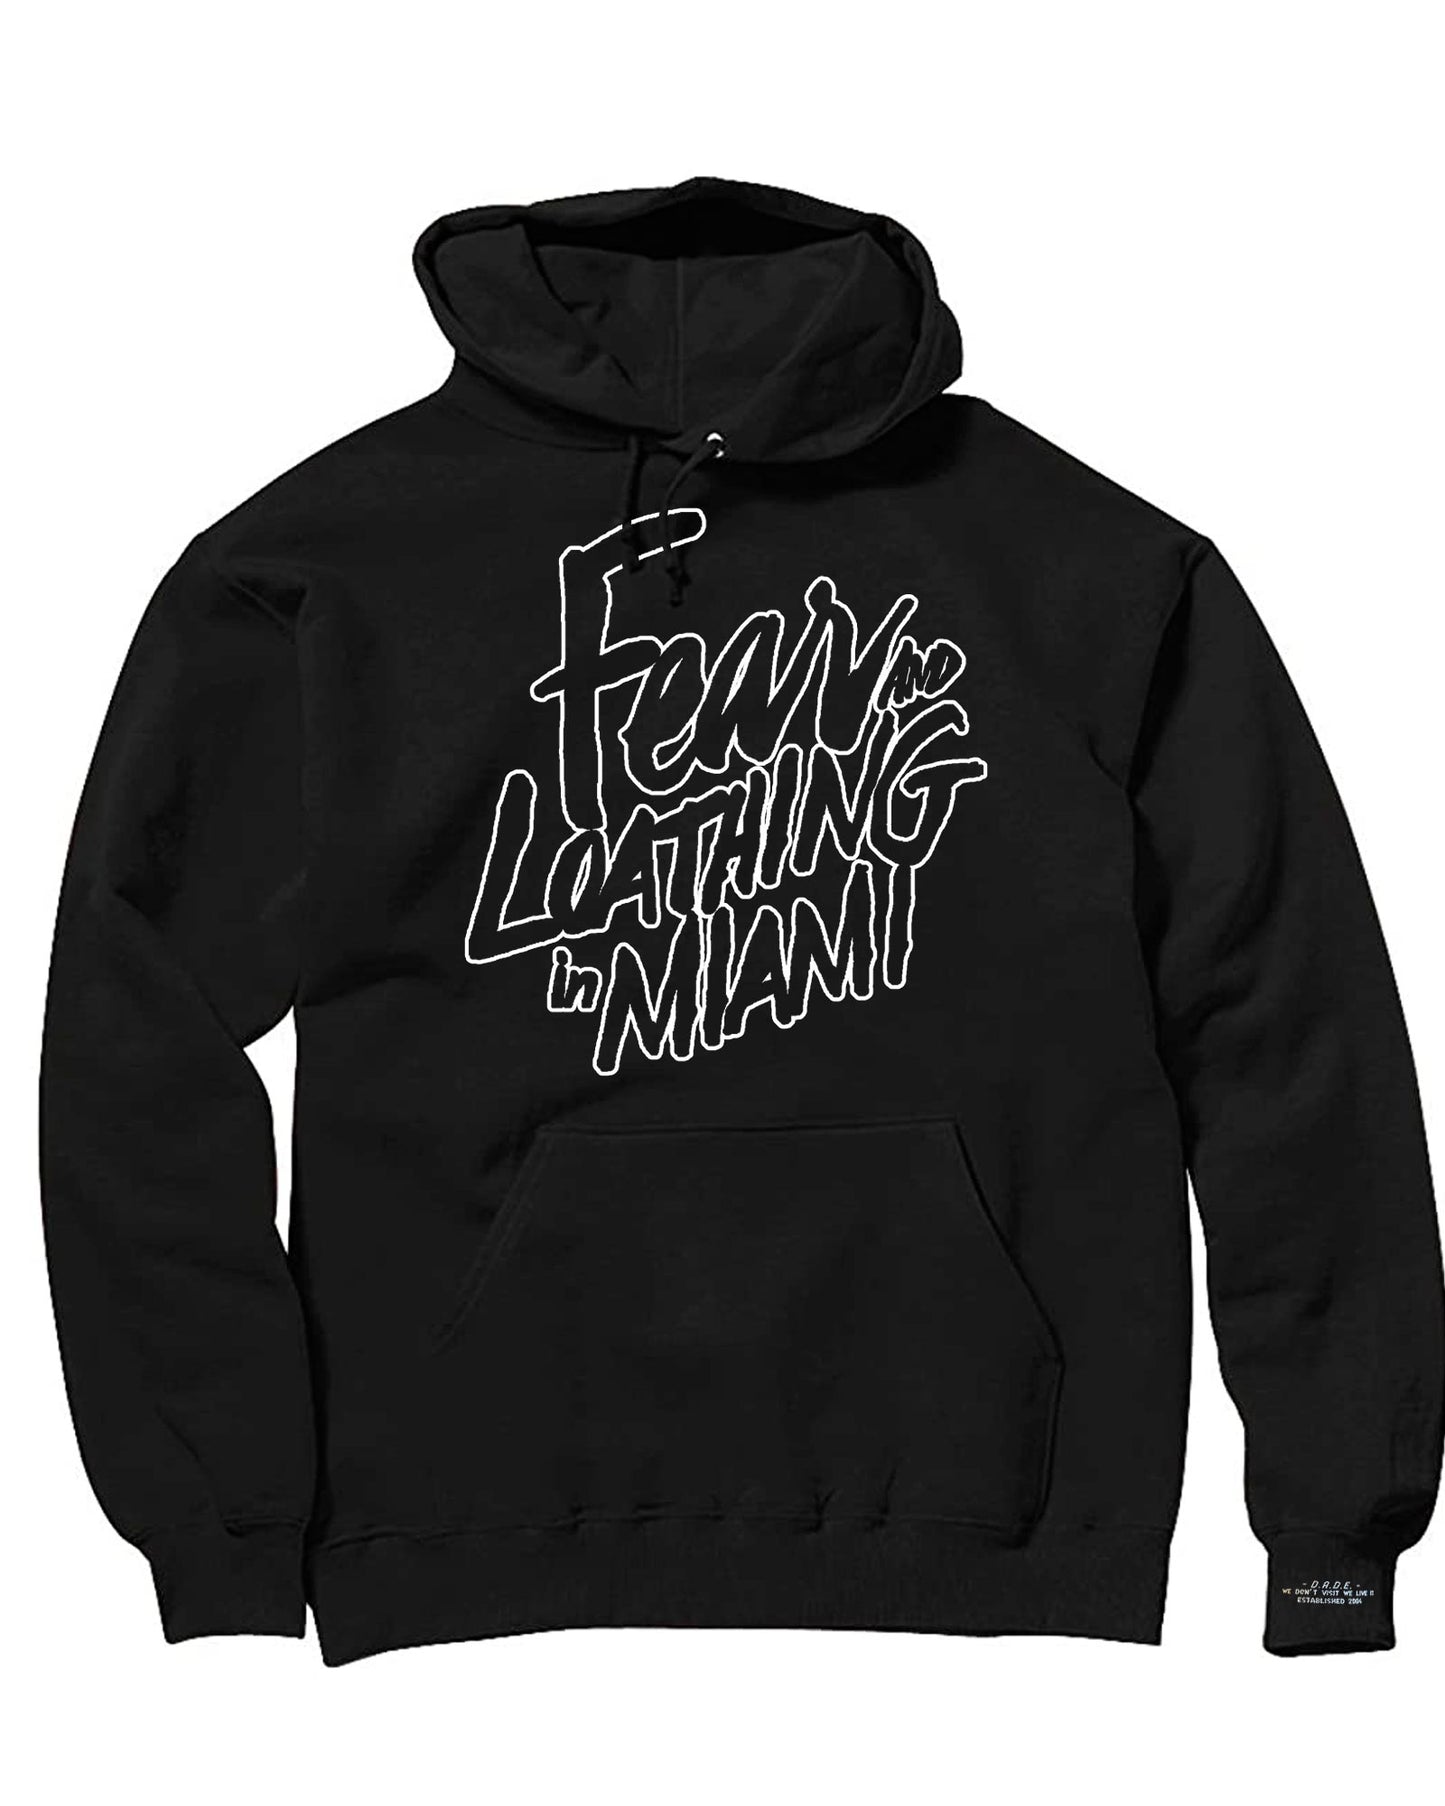 Fear and Loathing in Miami Light Weight Hoodie.